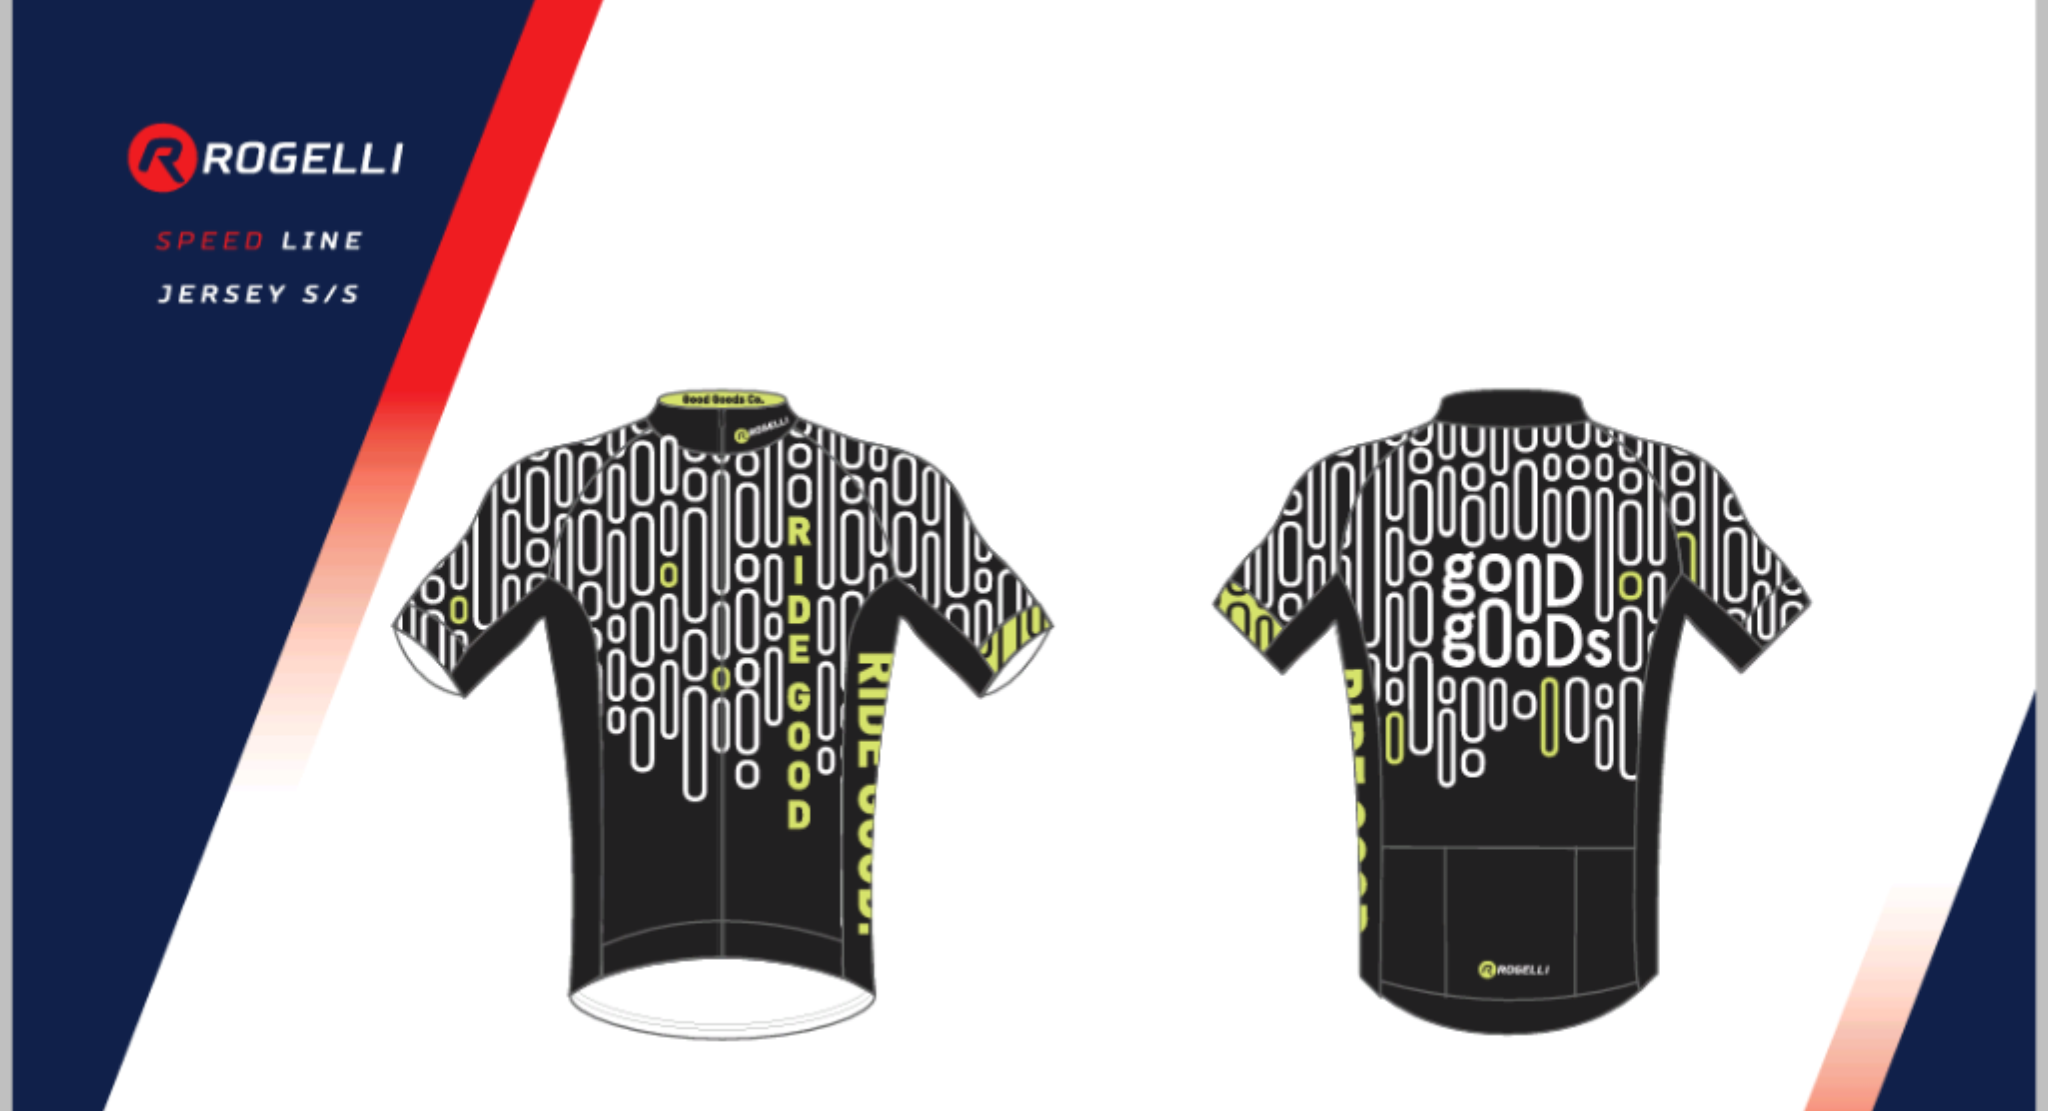 Cycling Jersey - Represent your community!